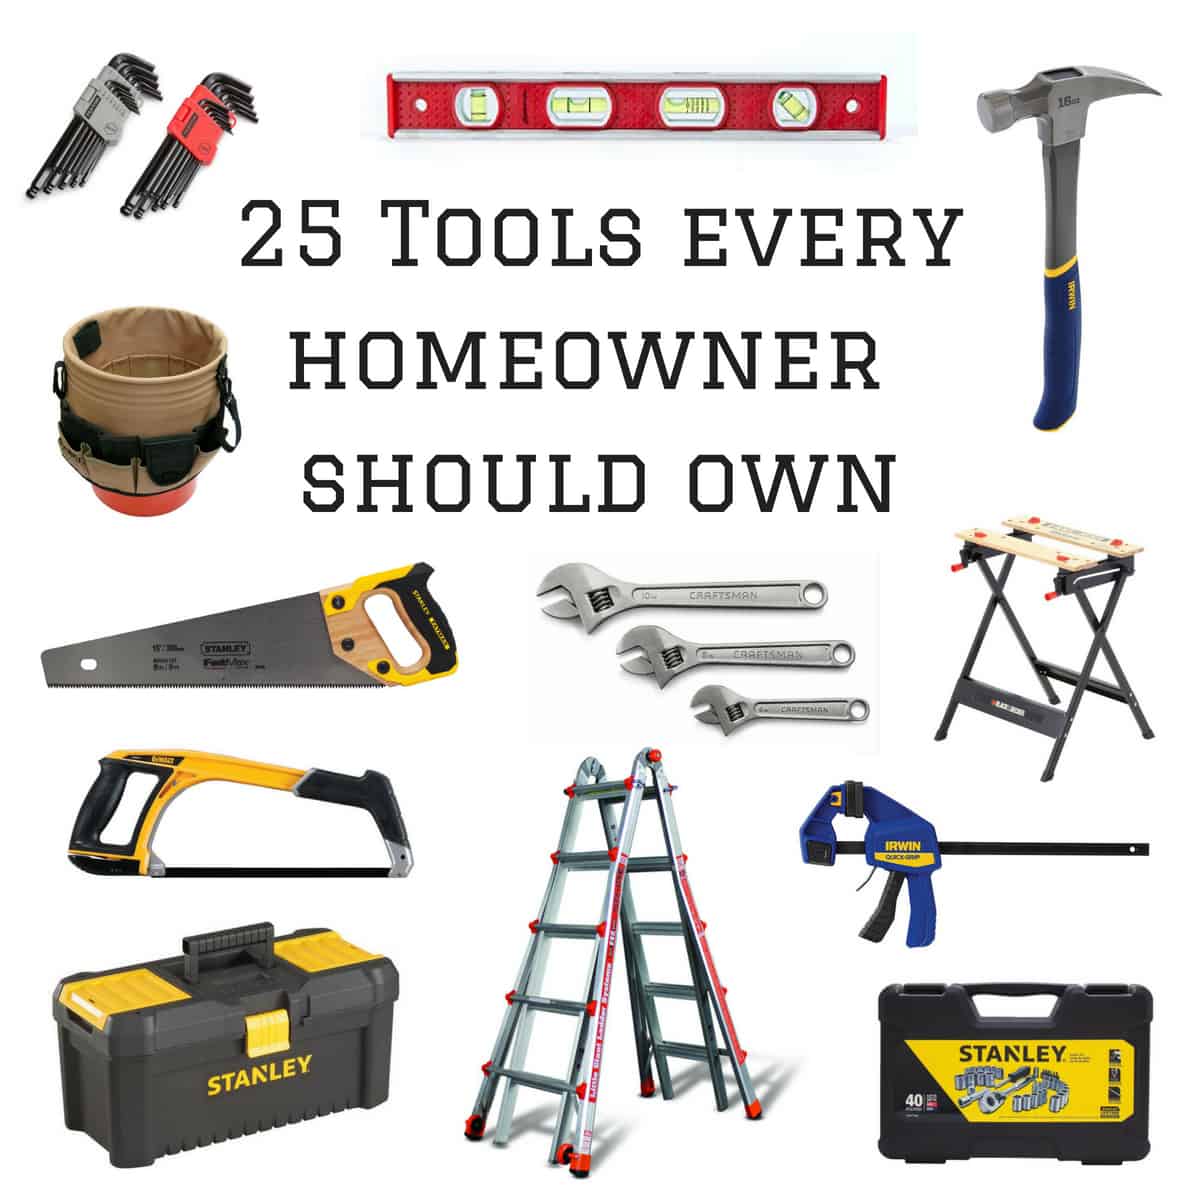 https://www.thehomestud.com/wp-content/uploads/2018/08/25-Tools-every-homeowner-should-own.jpg